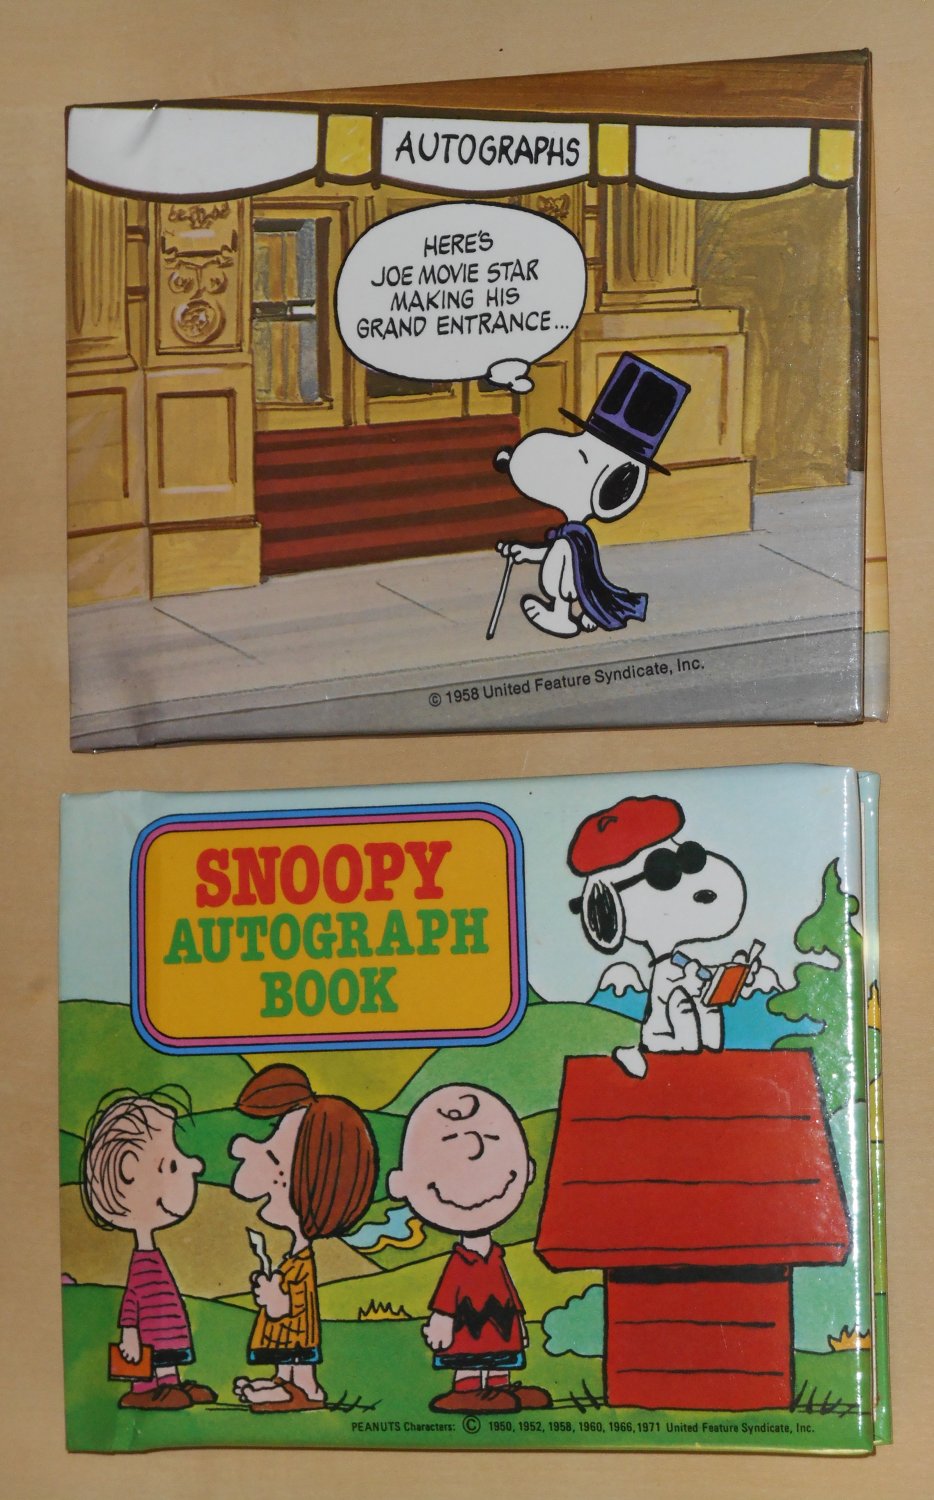 Snoopy Autograph Book Lot of 2 Peanuts Gang Butterfly Originals Joe Movie Star Made in USA